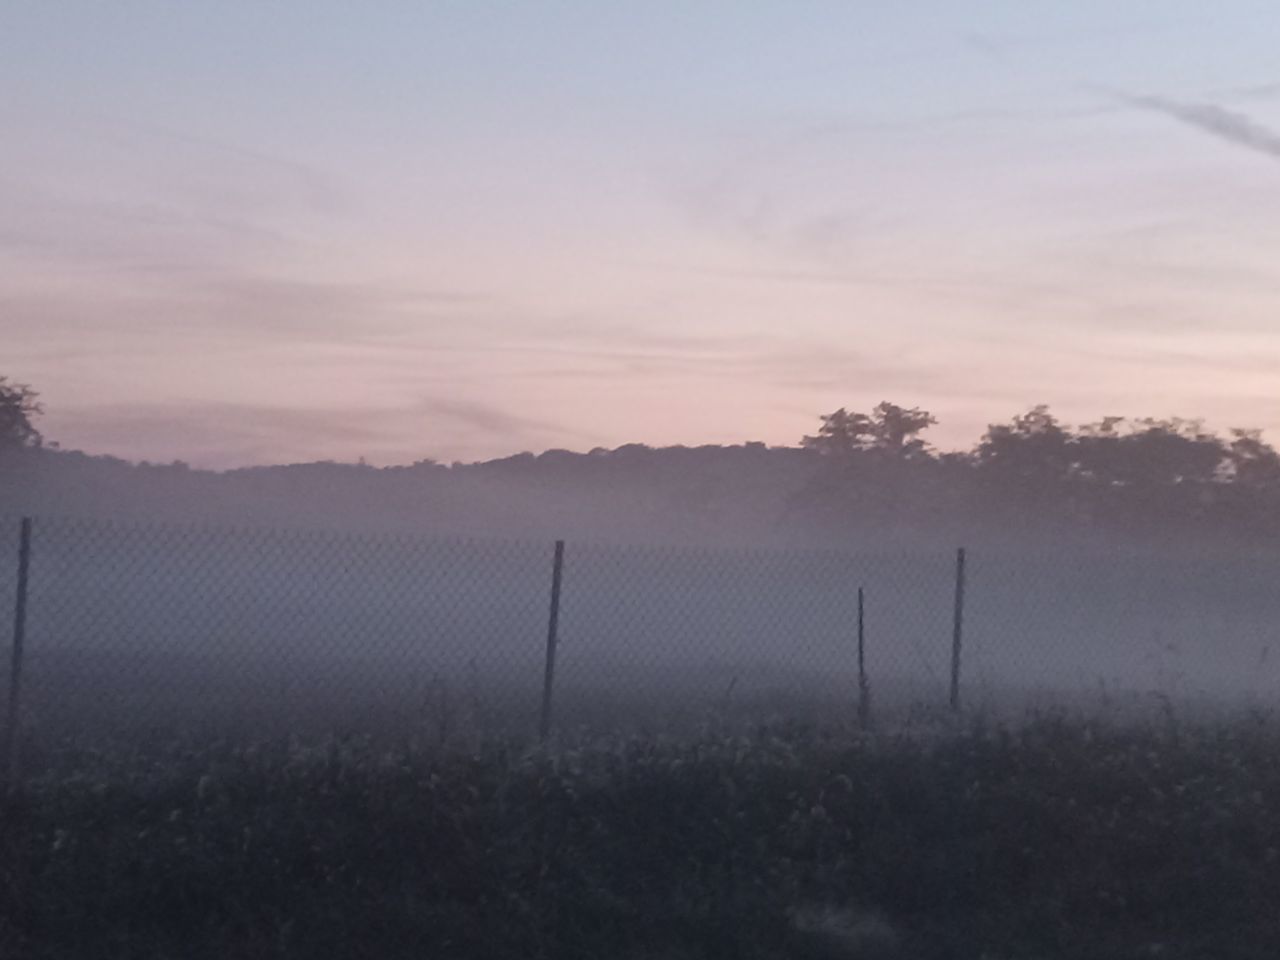 morning, mist, sky, fog, environment, fence, dawn, landscape, tranquility, sunrise, nature, cloud, tranquil scene, plant, horizon, scenics - nature, no people, land, beauty in nature, field, grass, rural scene, wire, twilight, tree, outdoors, sunlight, agriculture, idyllic, non-urban scene, sun, security, protection, haze